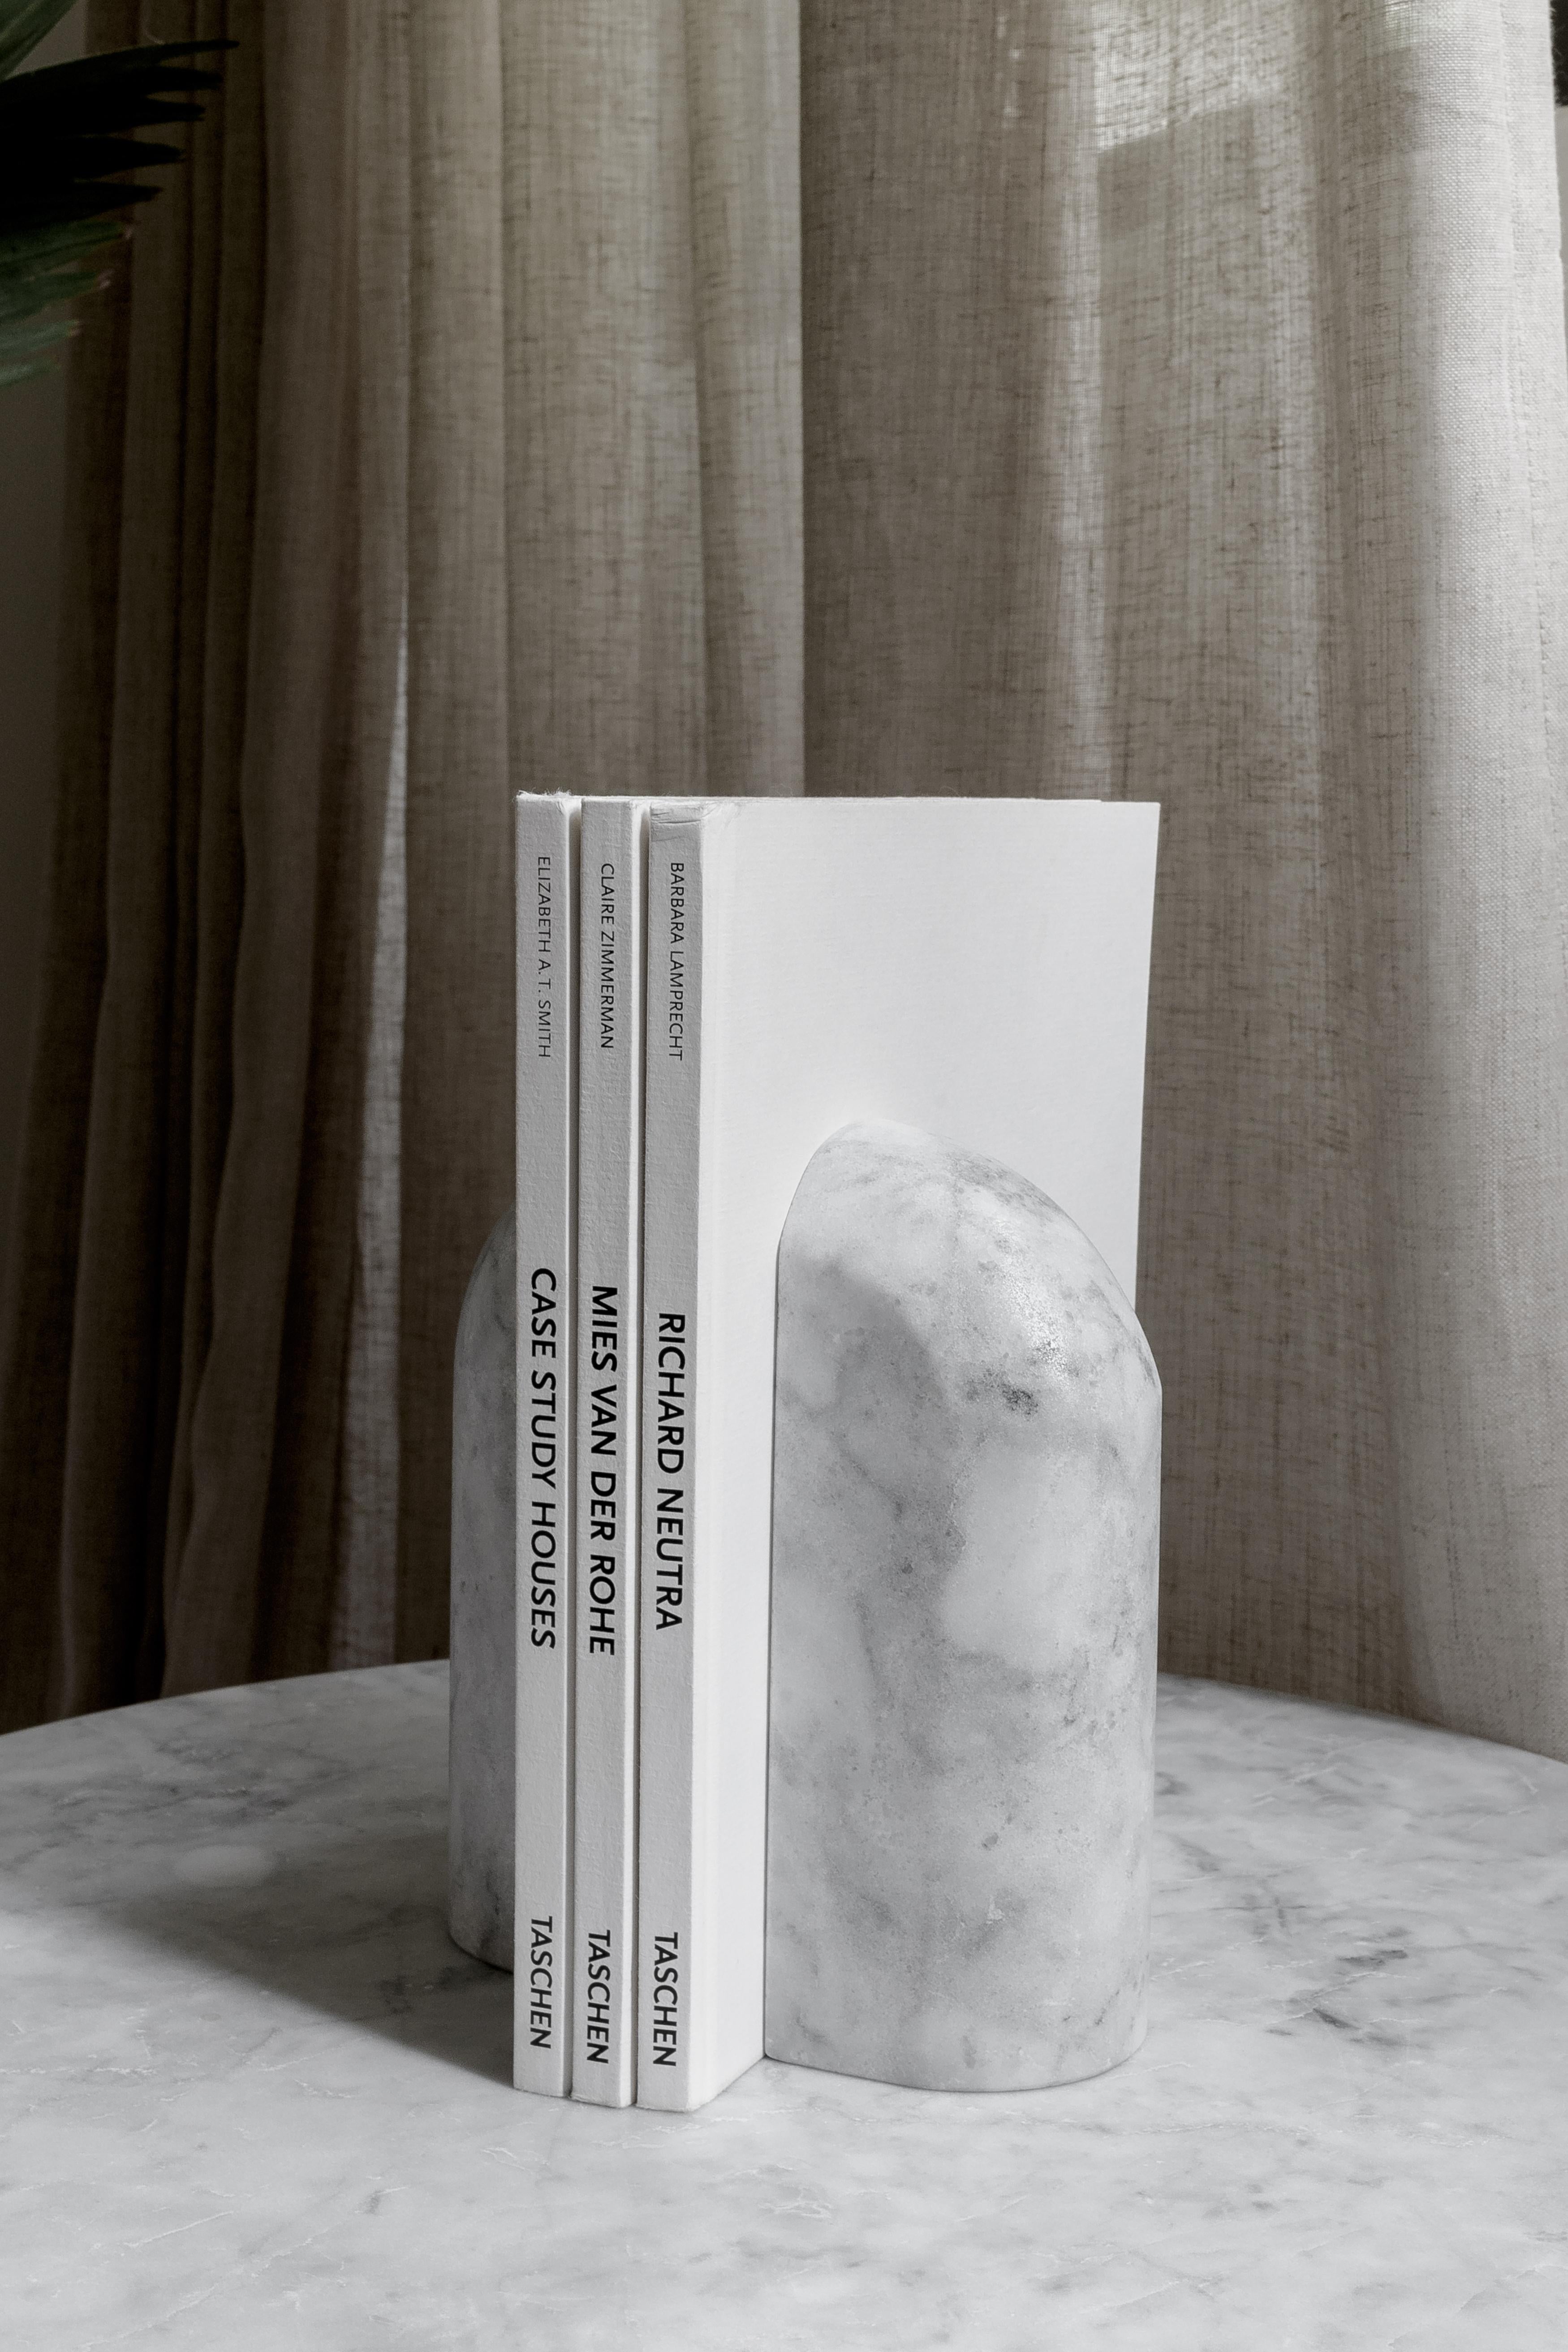 Bookend in carved Veneciano white marble. Handmade in Mexico.  The delivery time is 6 to 8 weeks for items without marble and 13 to 14 weeks for marble pieces. For shipping outside Mexico City 10 additional business days. â€¢ Casa Quieta uses woods,